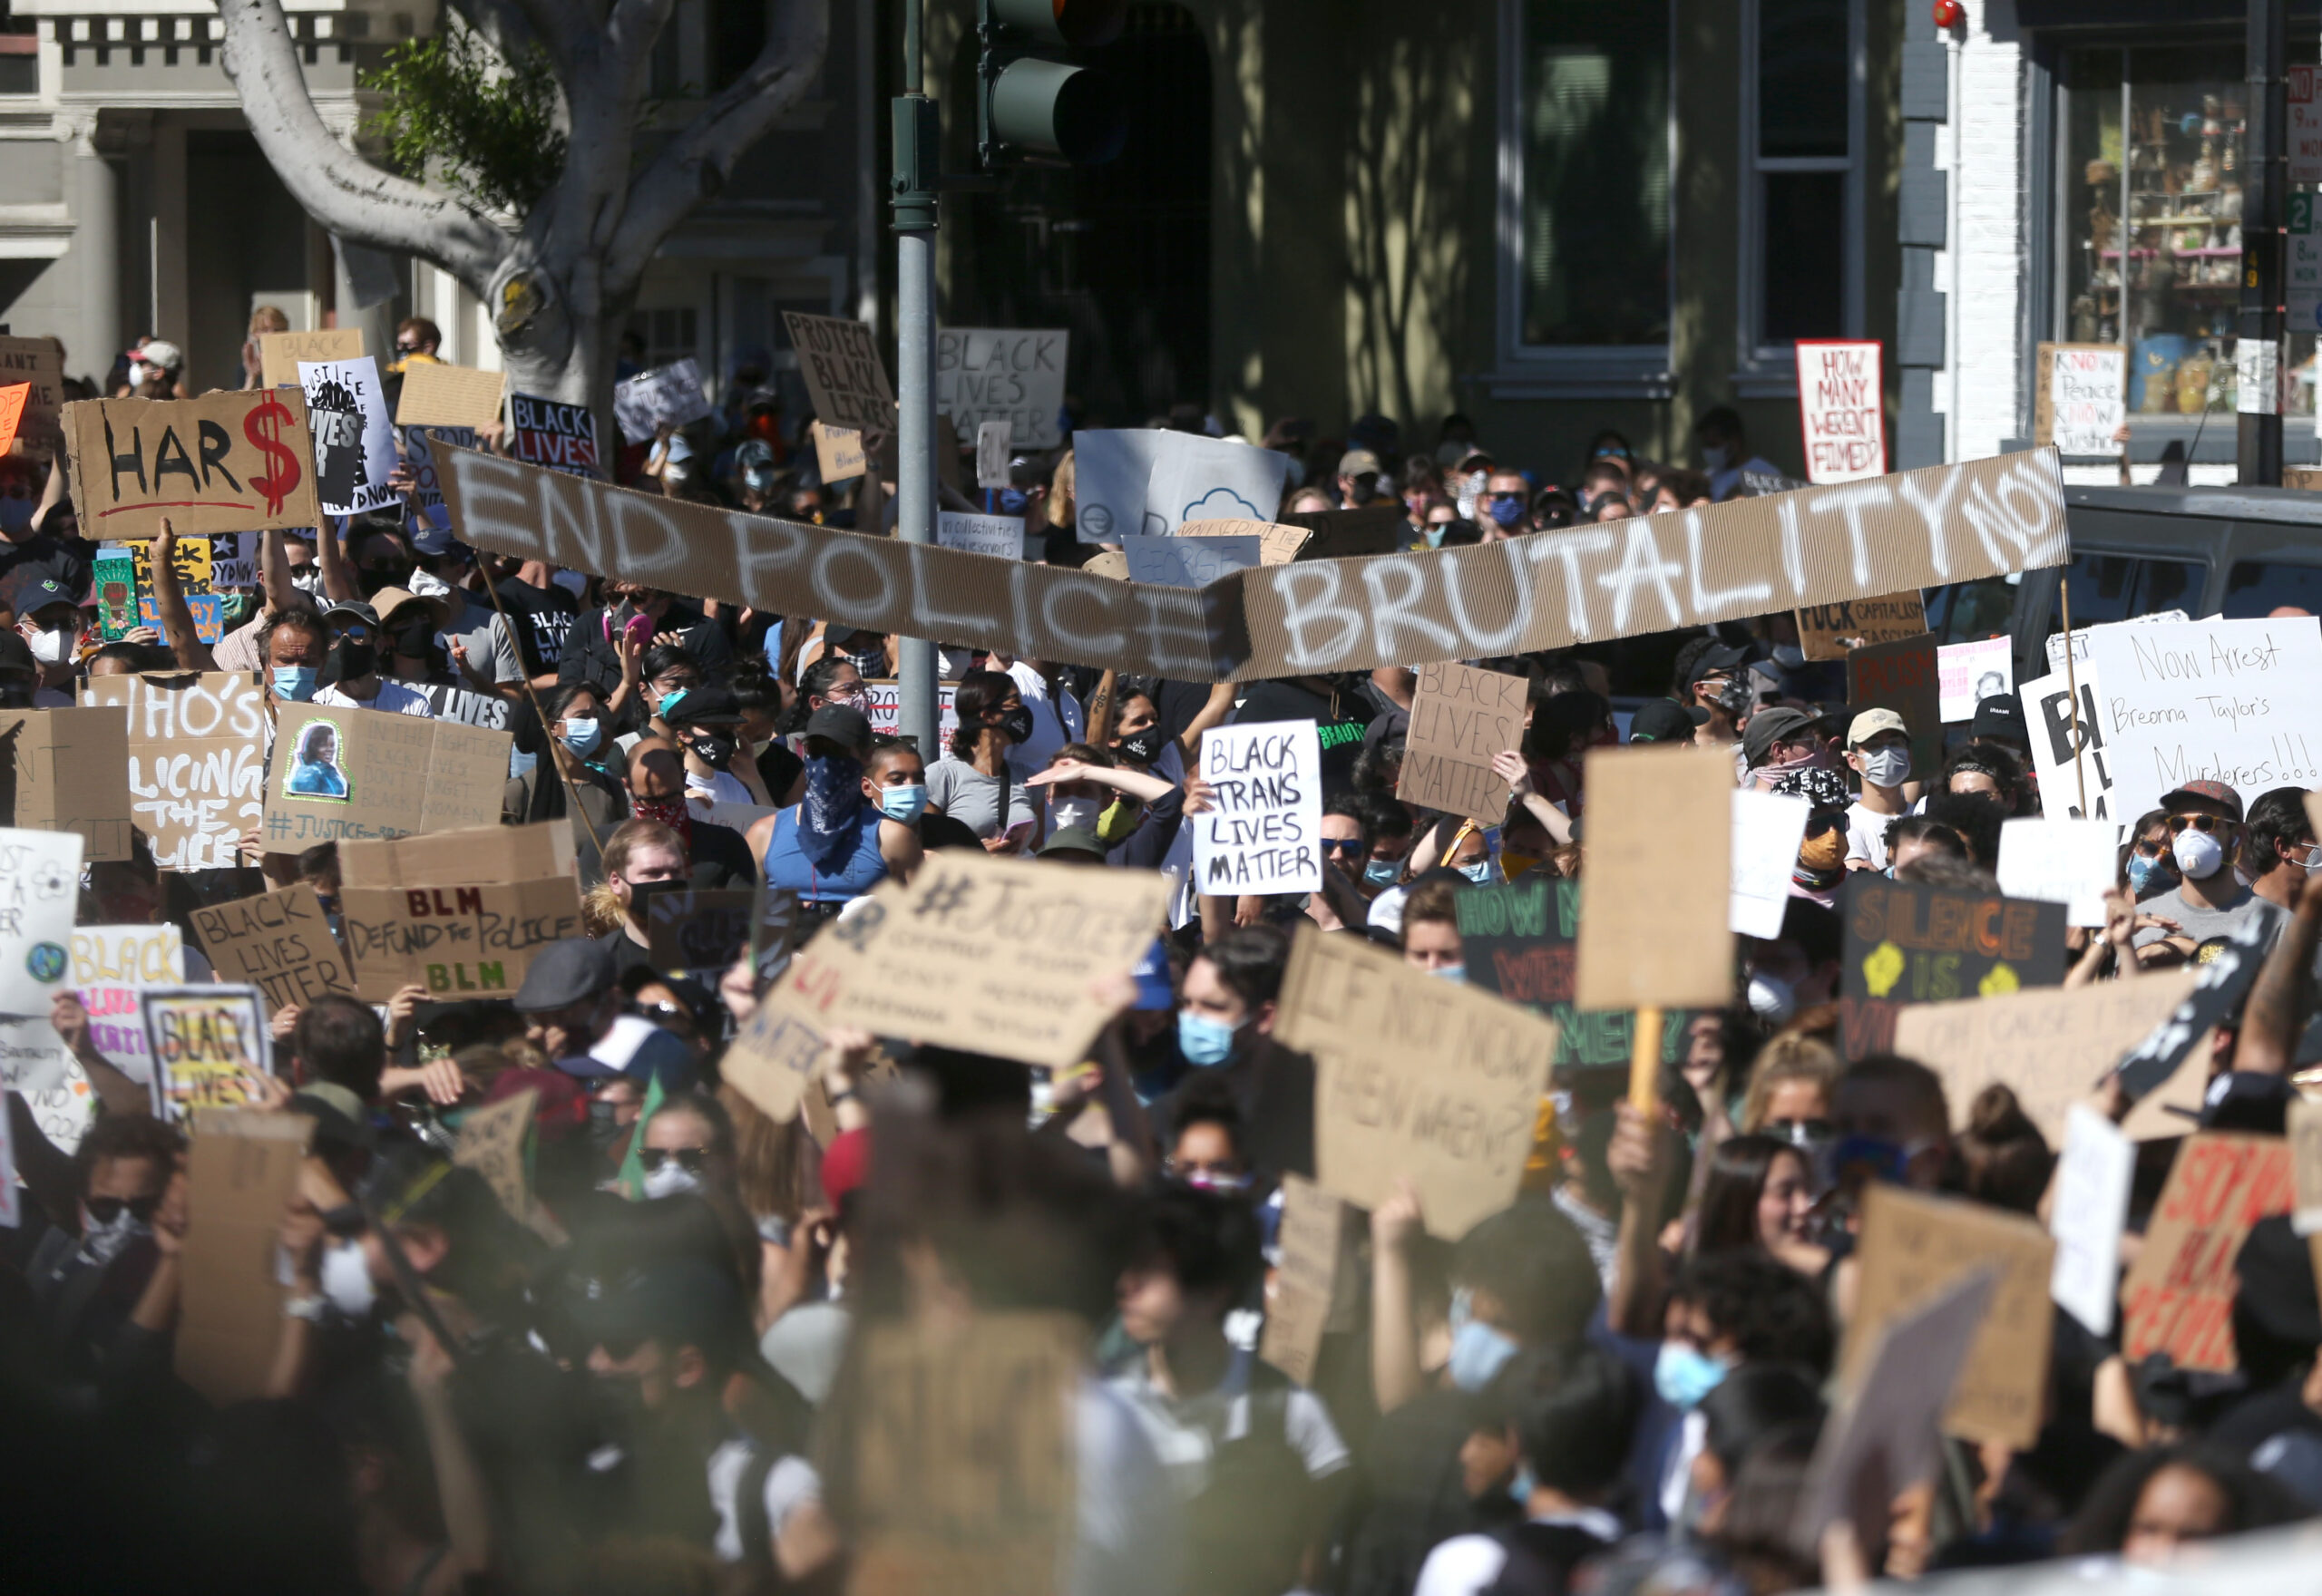 It’s in New York at 8 a.m. and 5 a.m. in San Francisco. Here is the latest world protest